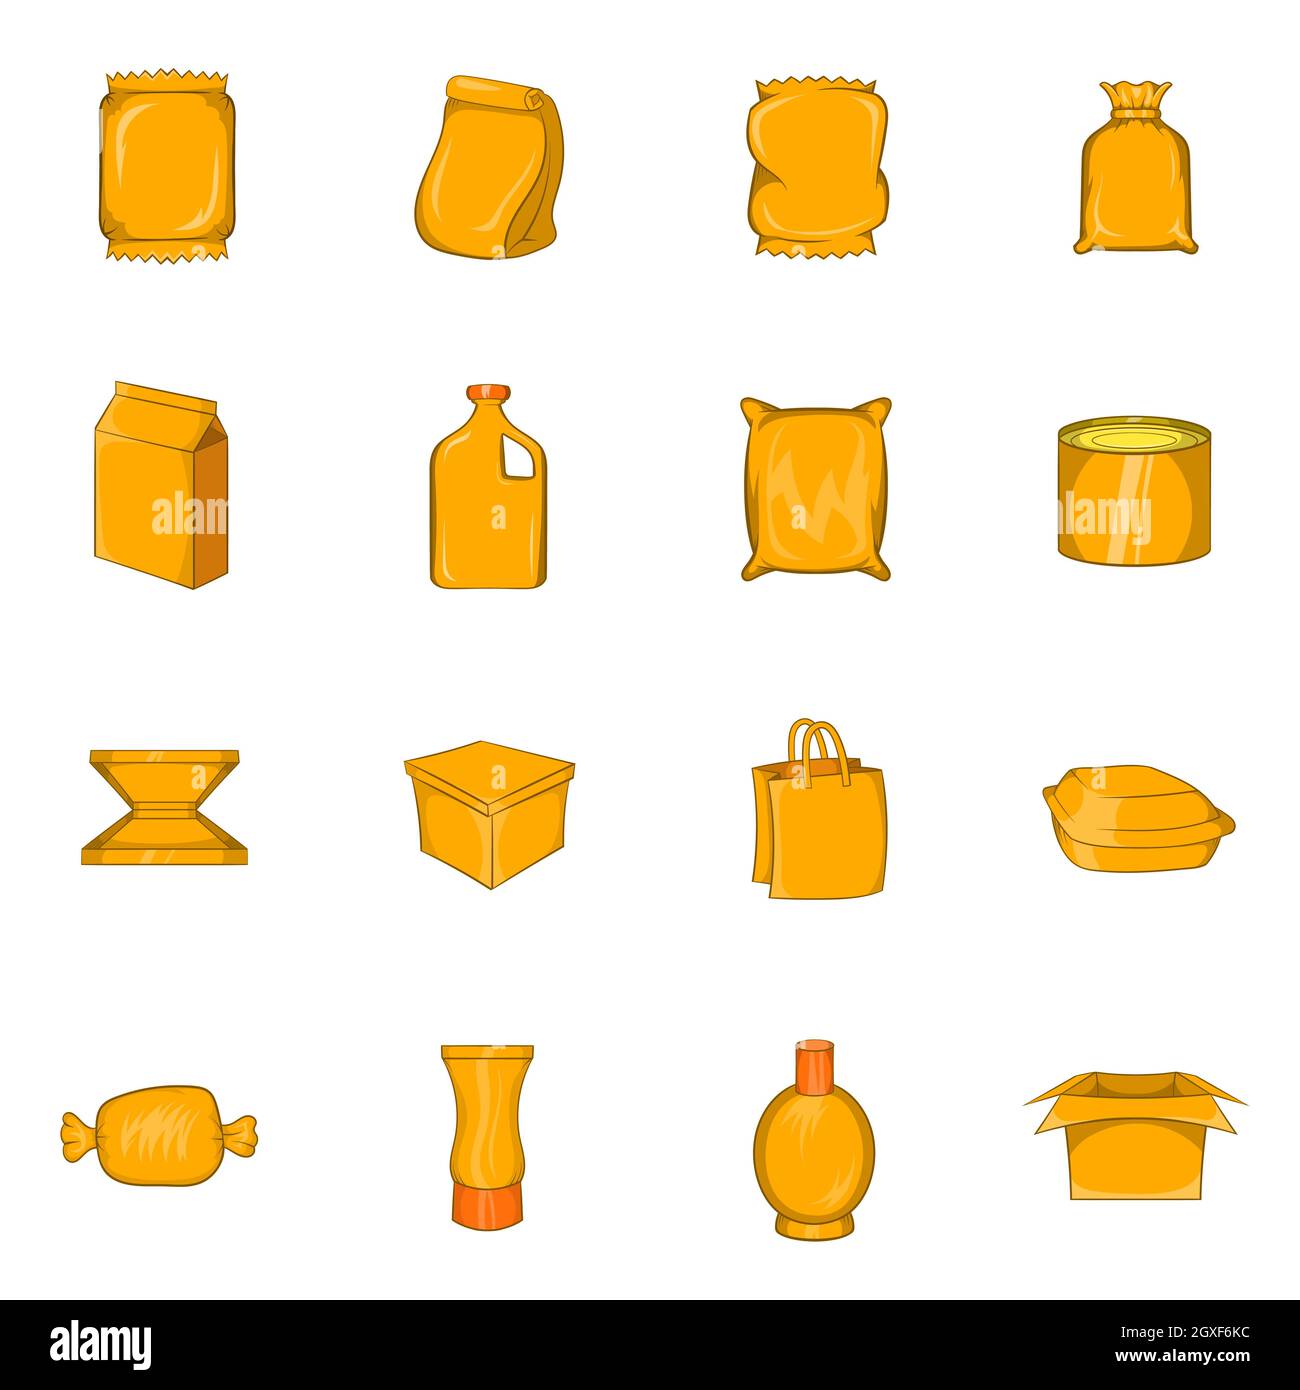 Packing icons set in cartoon style isolated on white background Stock Photo